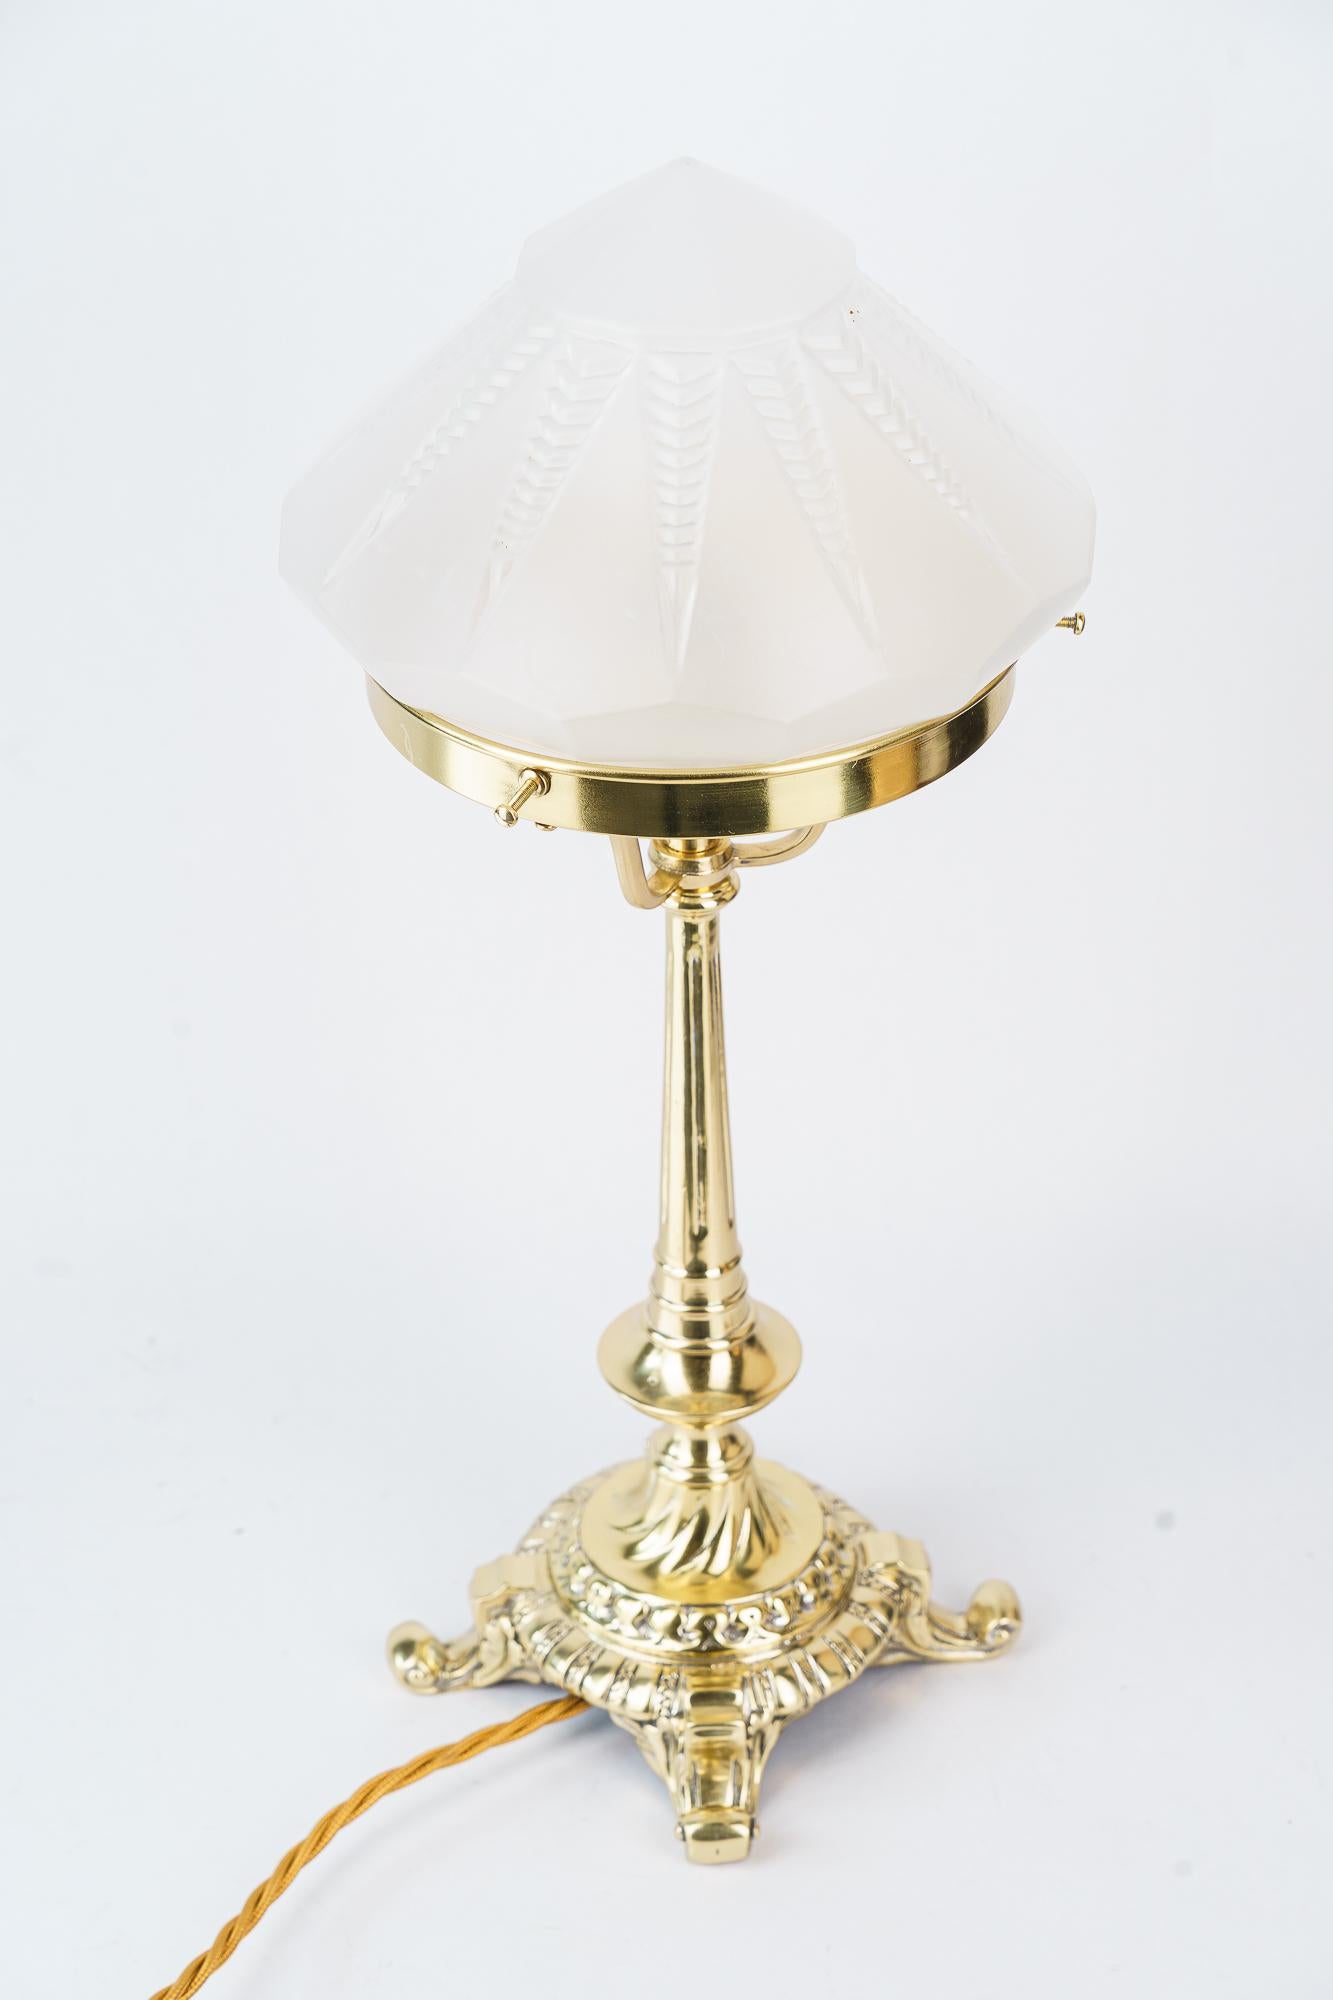 Historistic Table lamp with original antique glass shade vienna around 1890s
Polished and stove enameled
Original antique glass shade